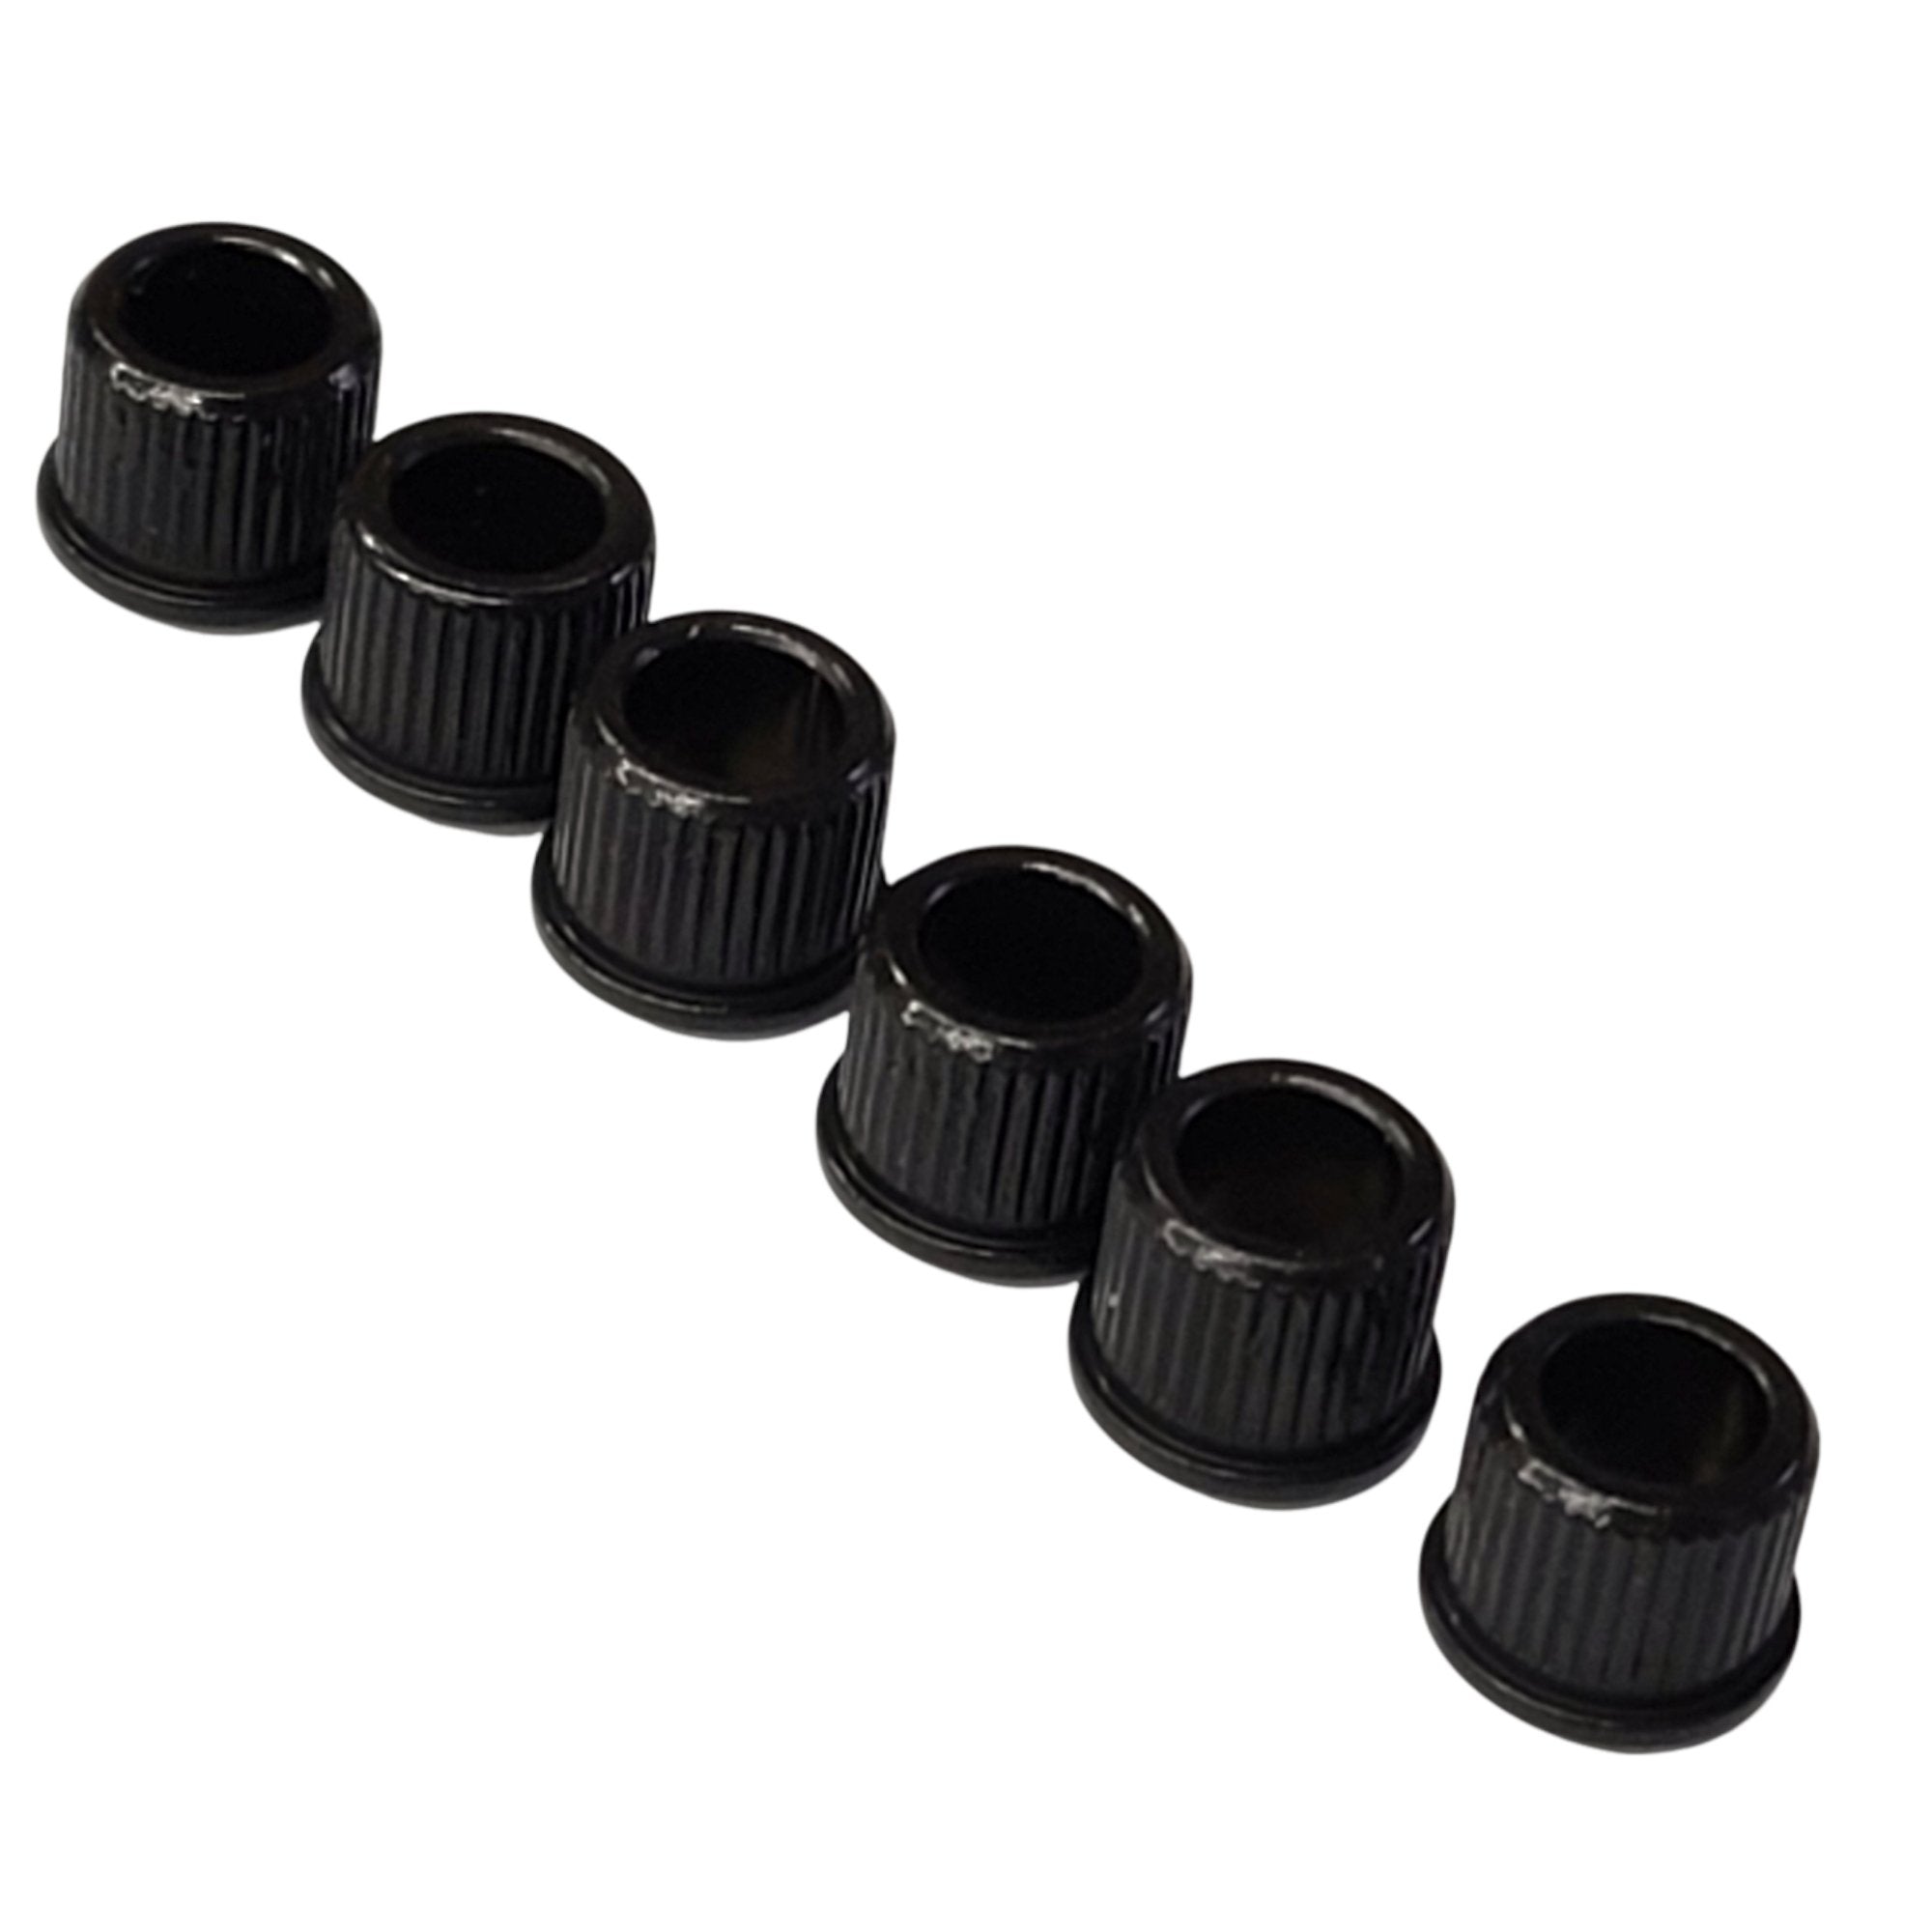 Kluson 1/4" Adapter Bushings For Deluxe Or Supreme Series Tuning Machines